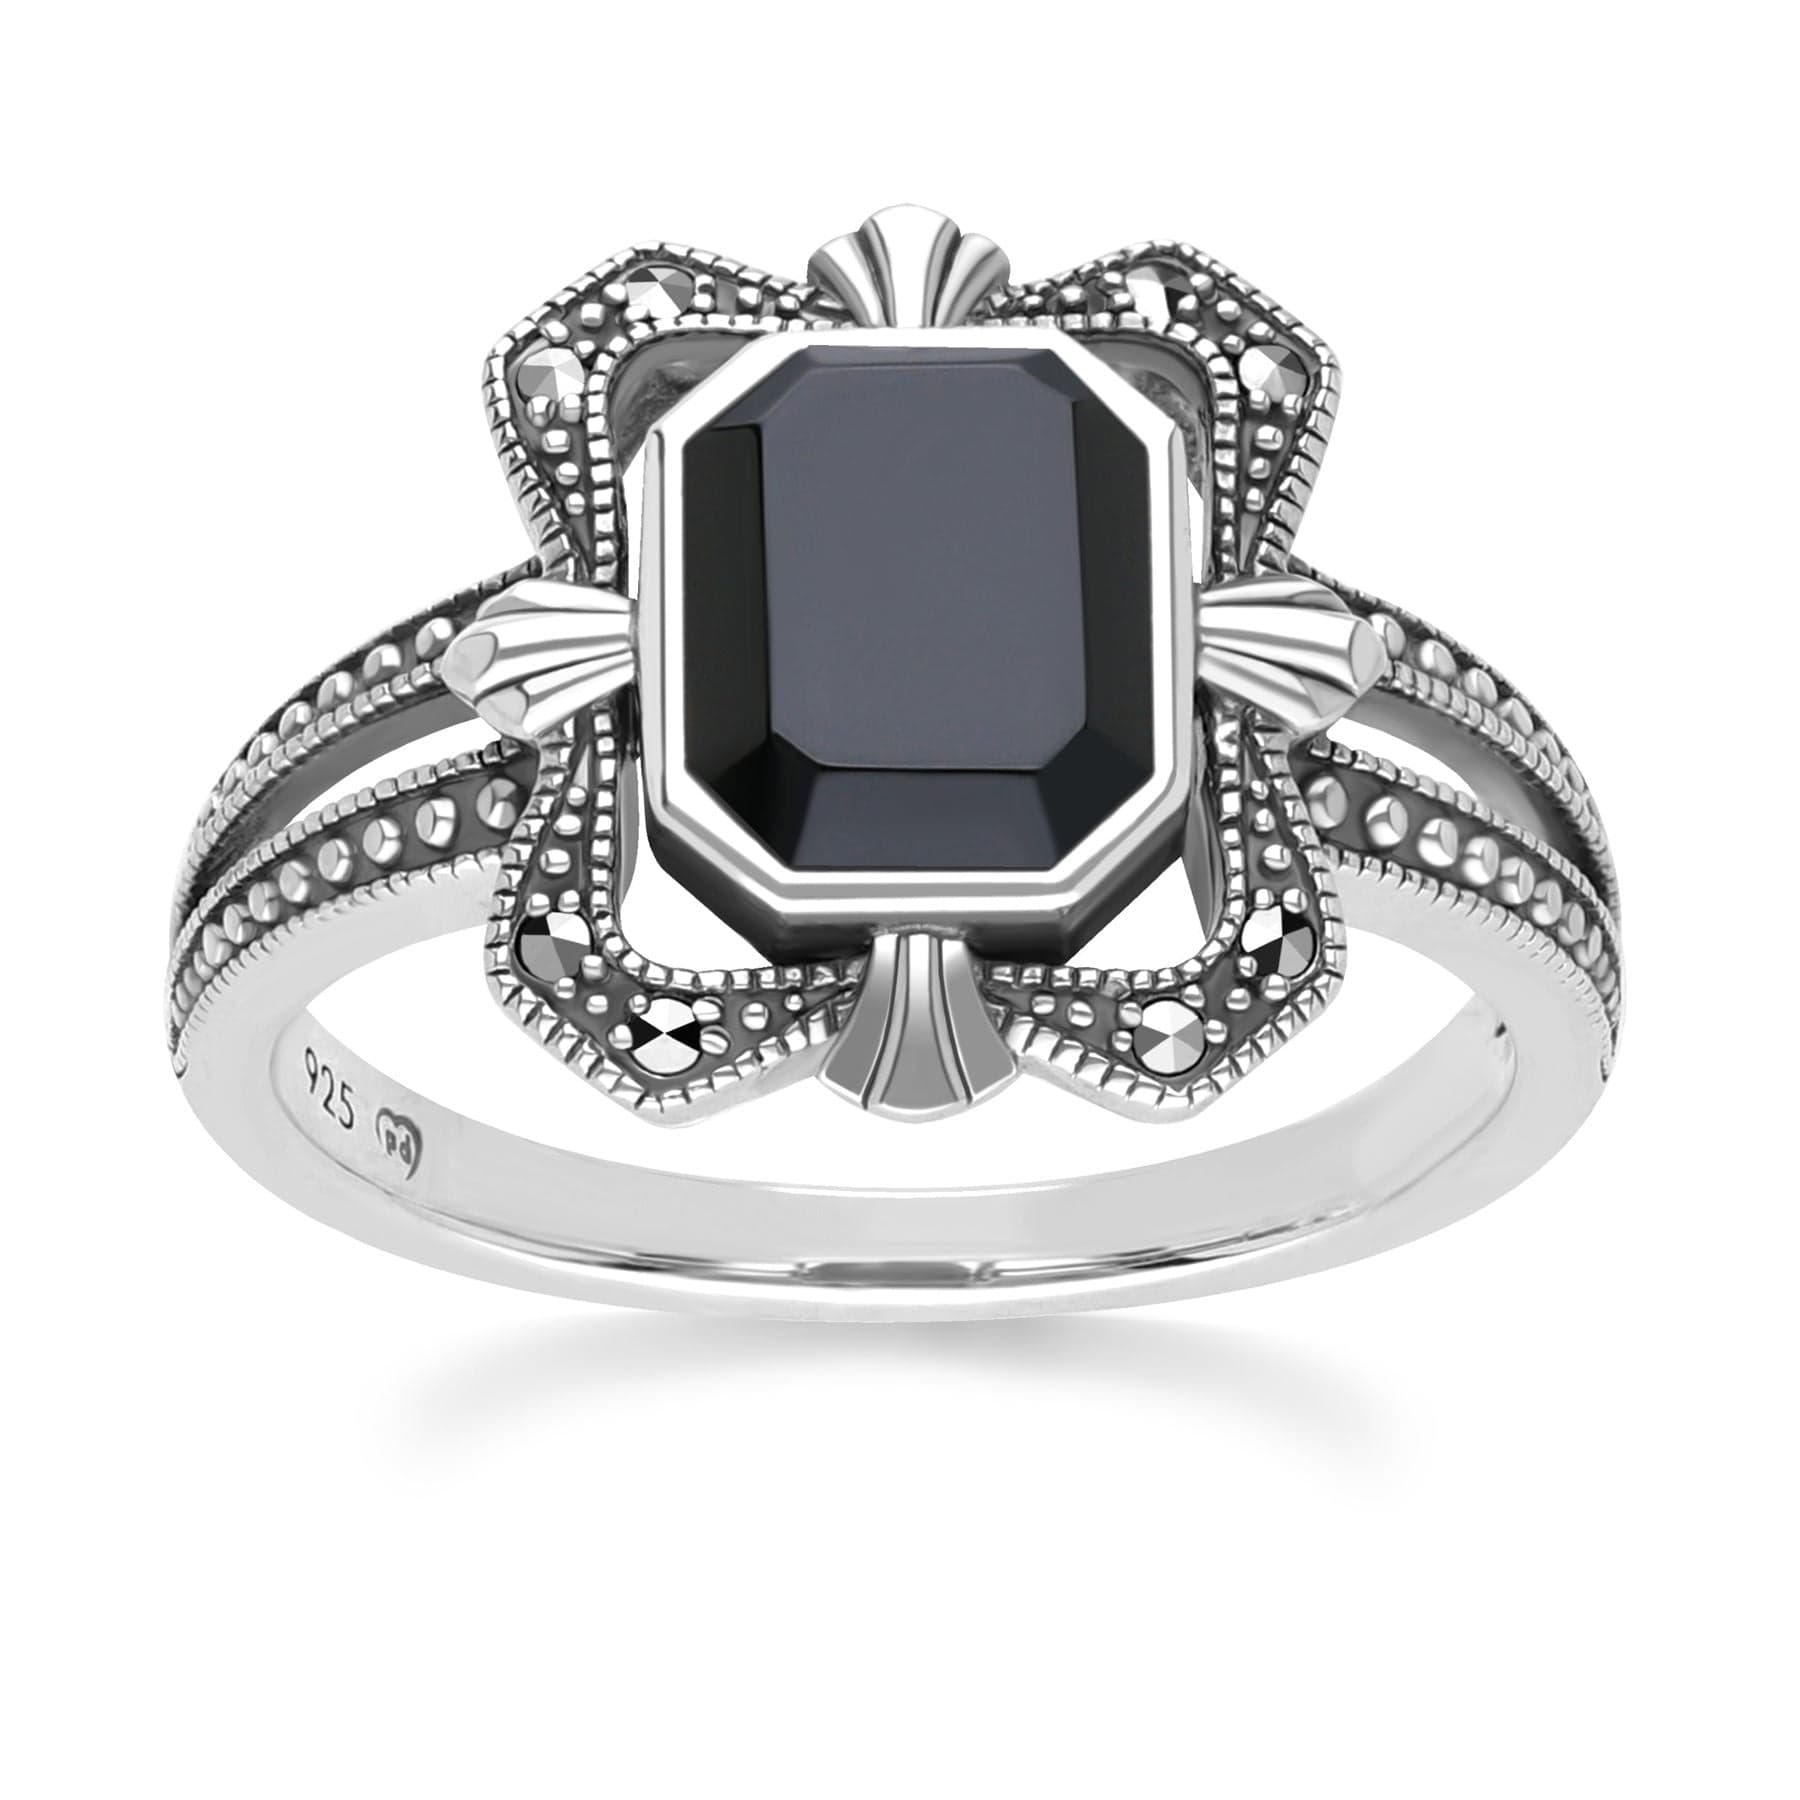 Art Deco Style Baguette Onyx and Marcasite Ring in Sterling Silver 214R642302925 